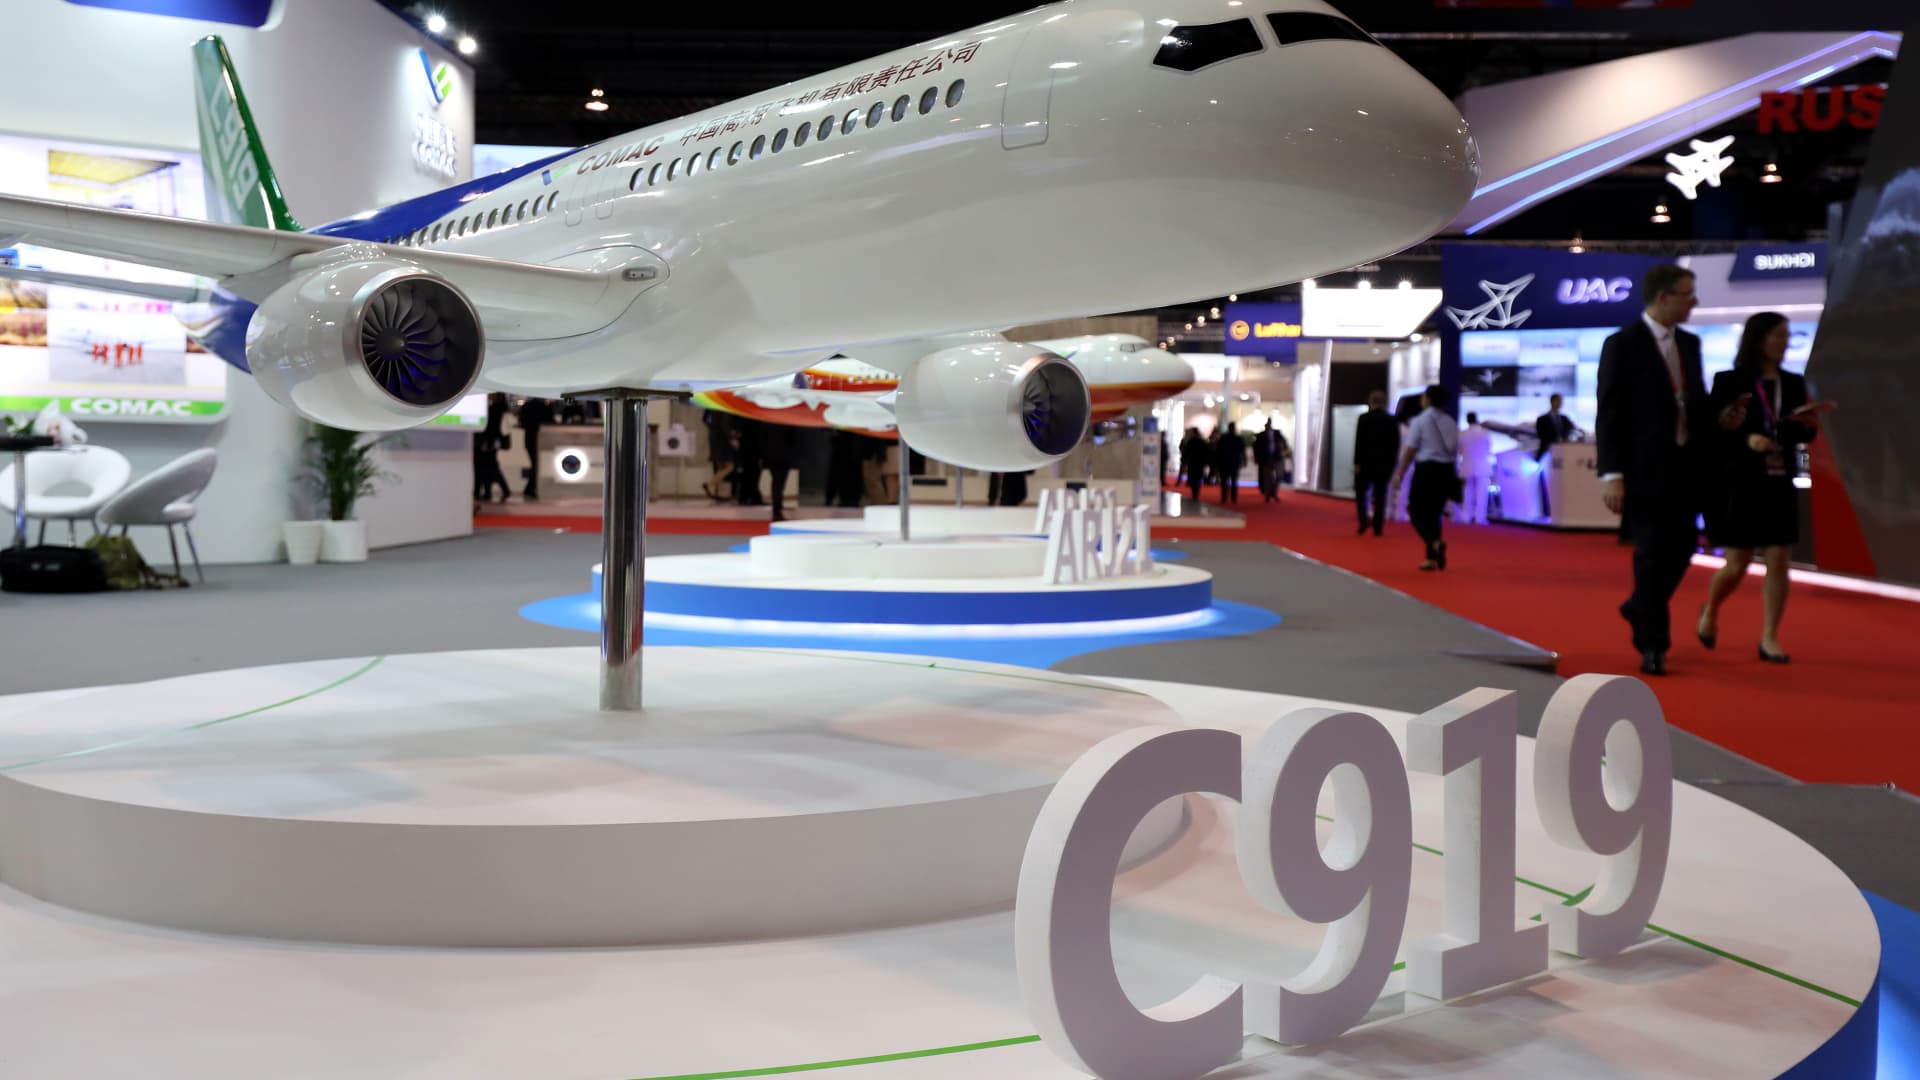 China will showcase its domestic jetliner at the Singapore Airshow. Here’s what else to expect